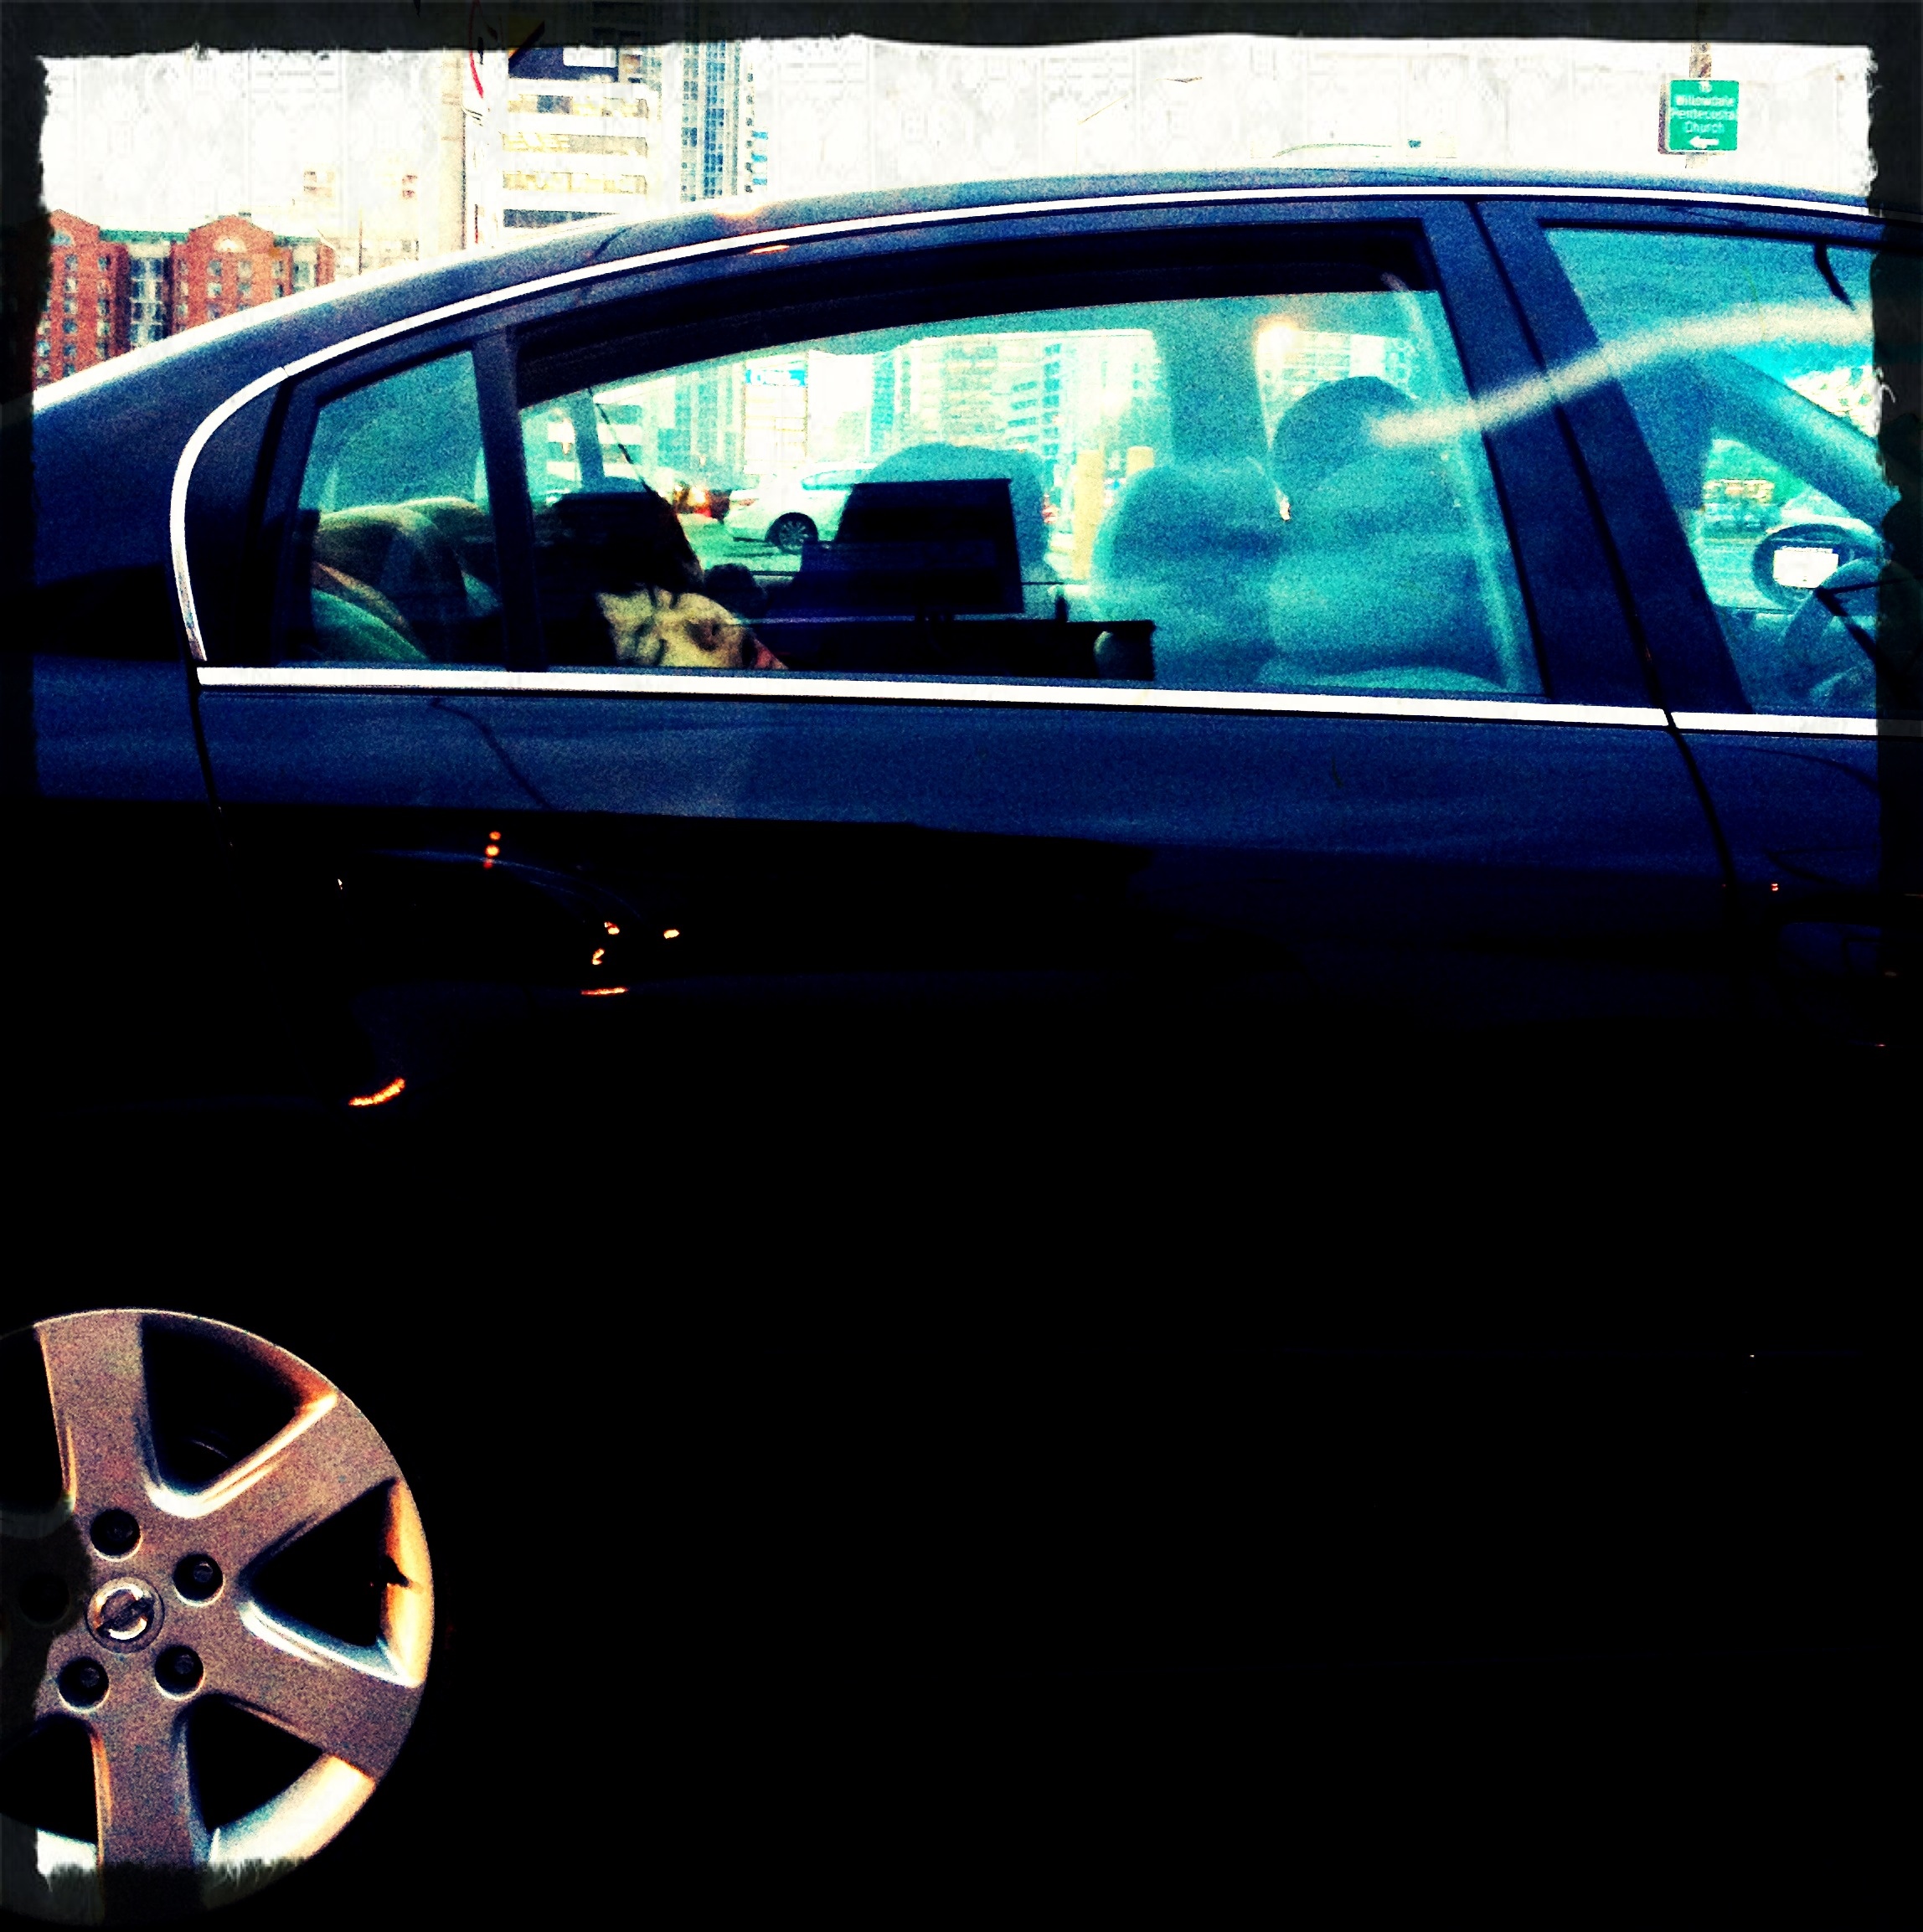 "Surfacing" - Car passenger naps in the rear-seat, Willowdale, Toronto